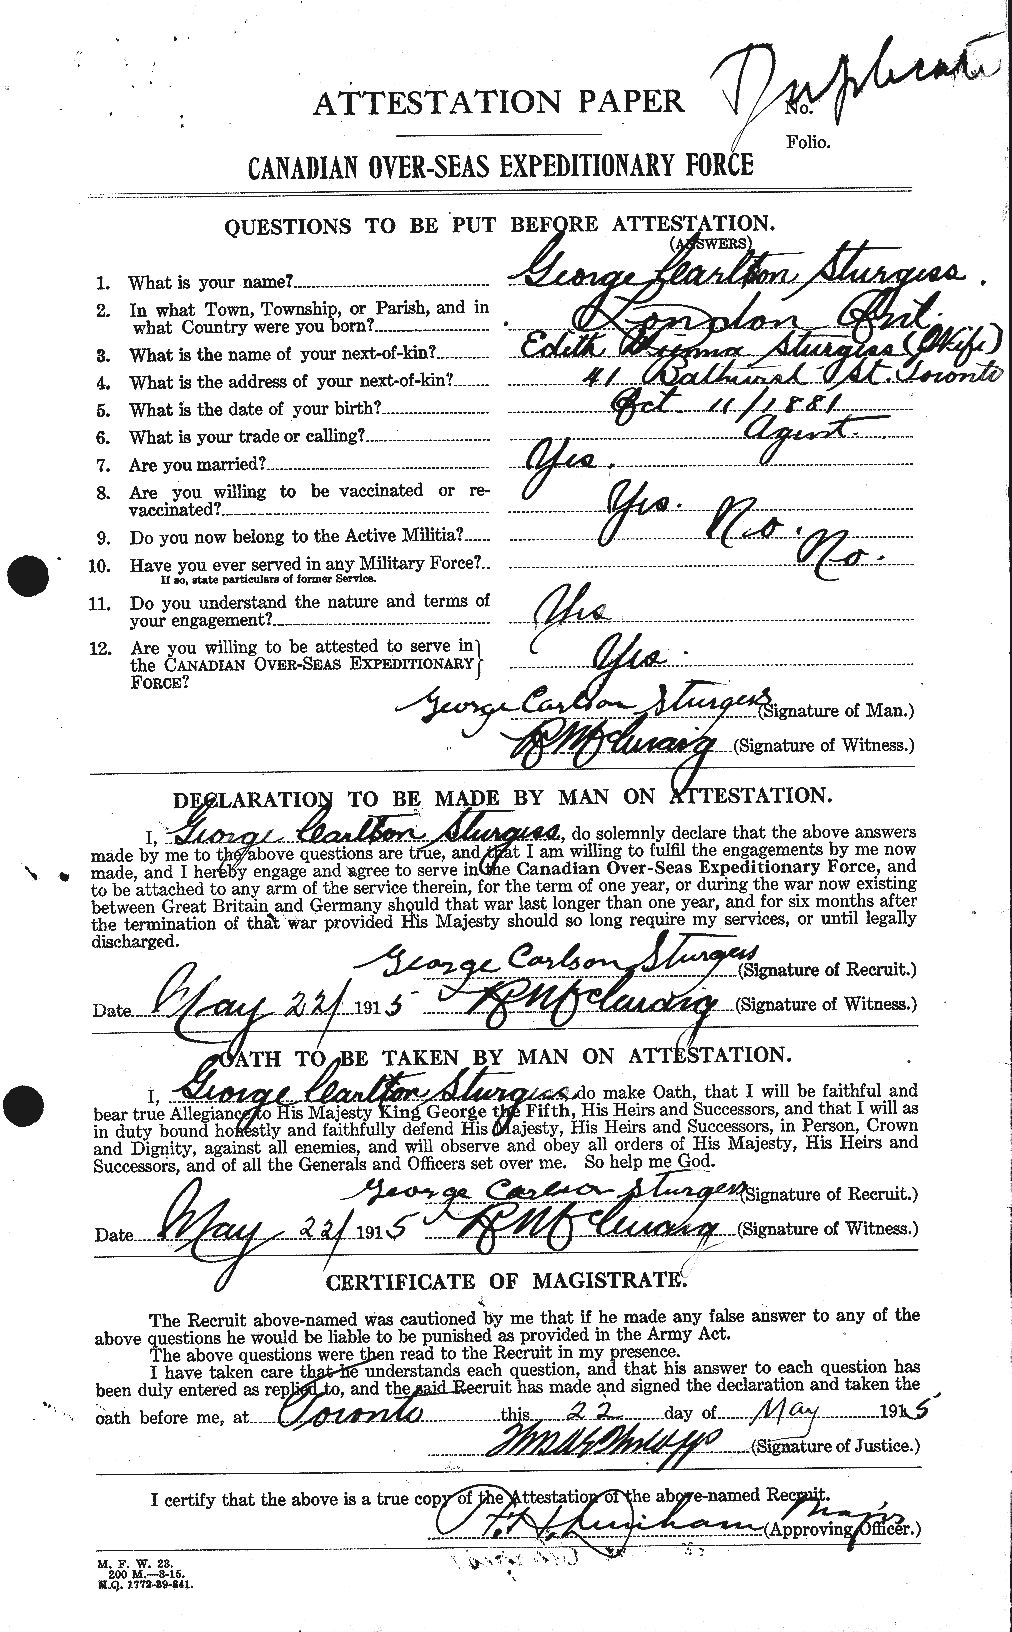 Personnel Records of the First World War - CEF 623148a